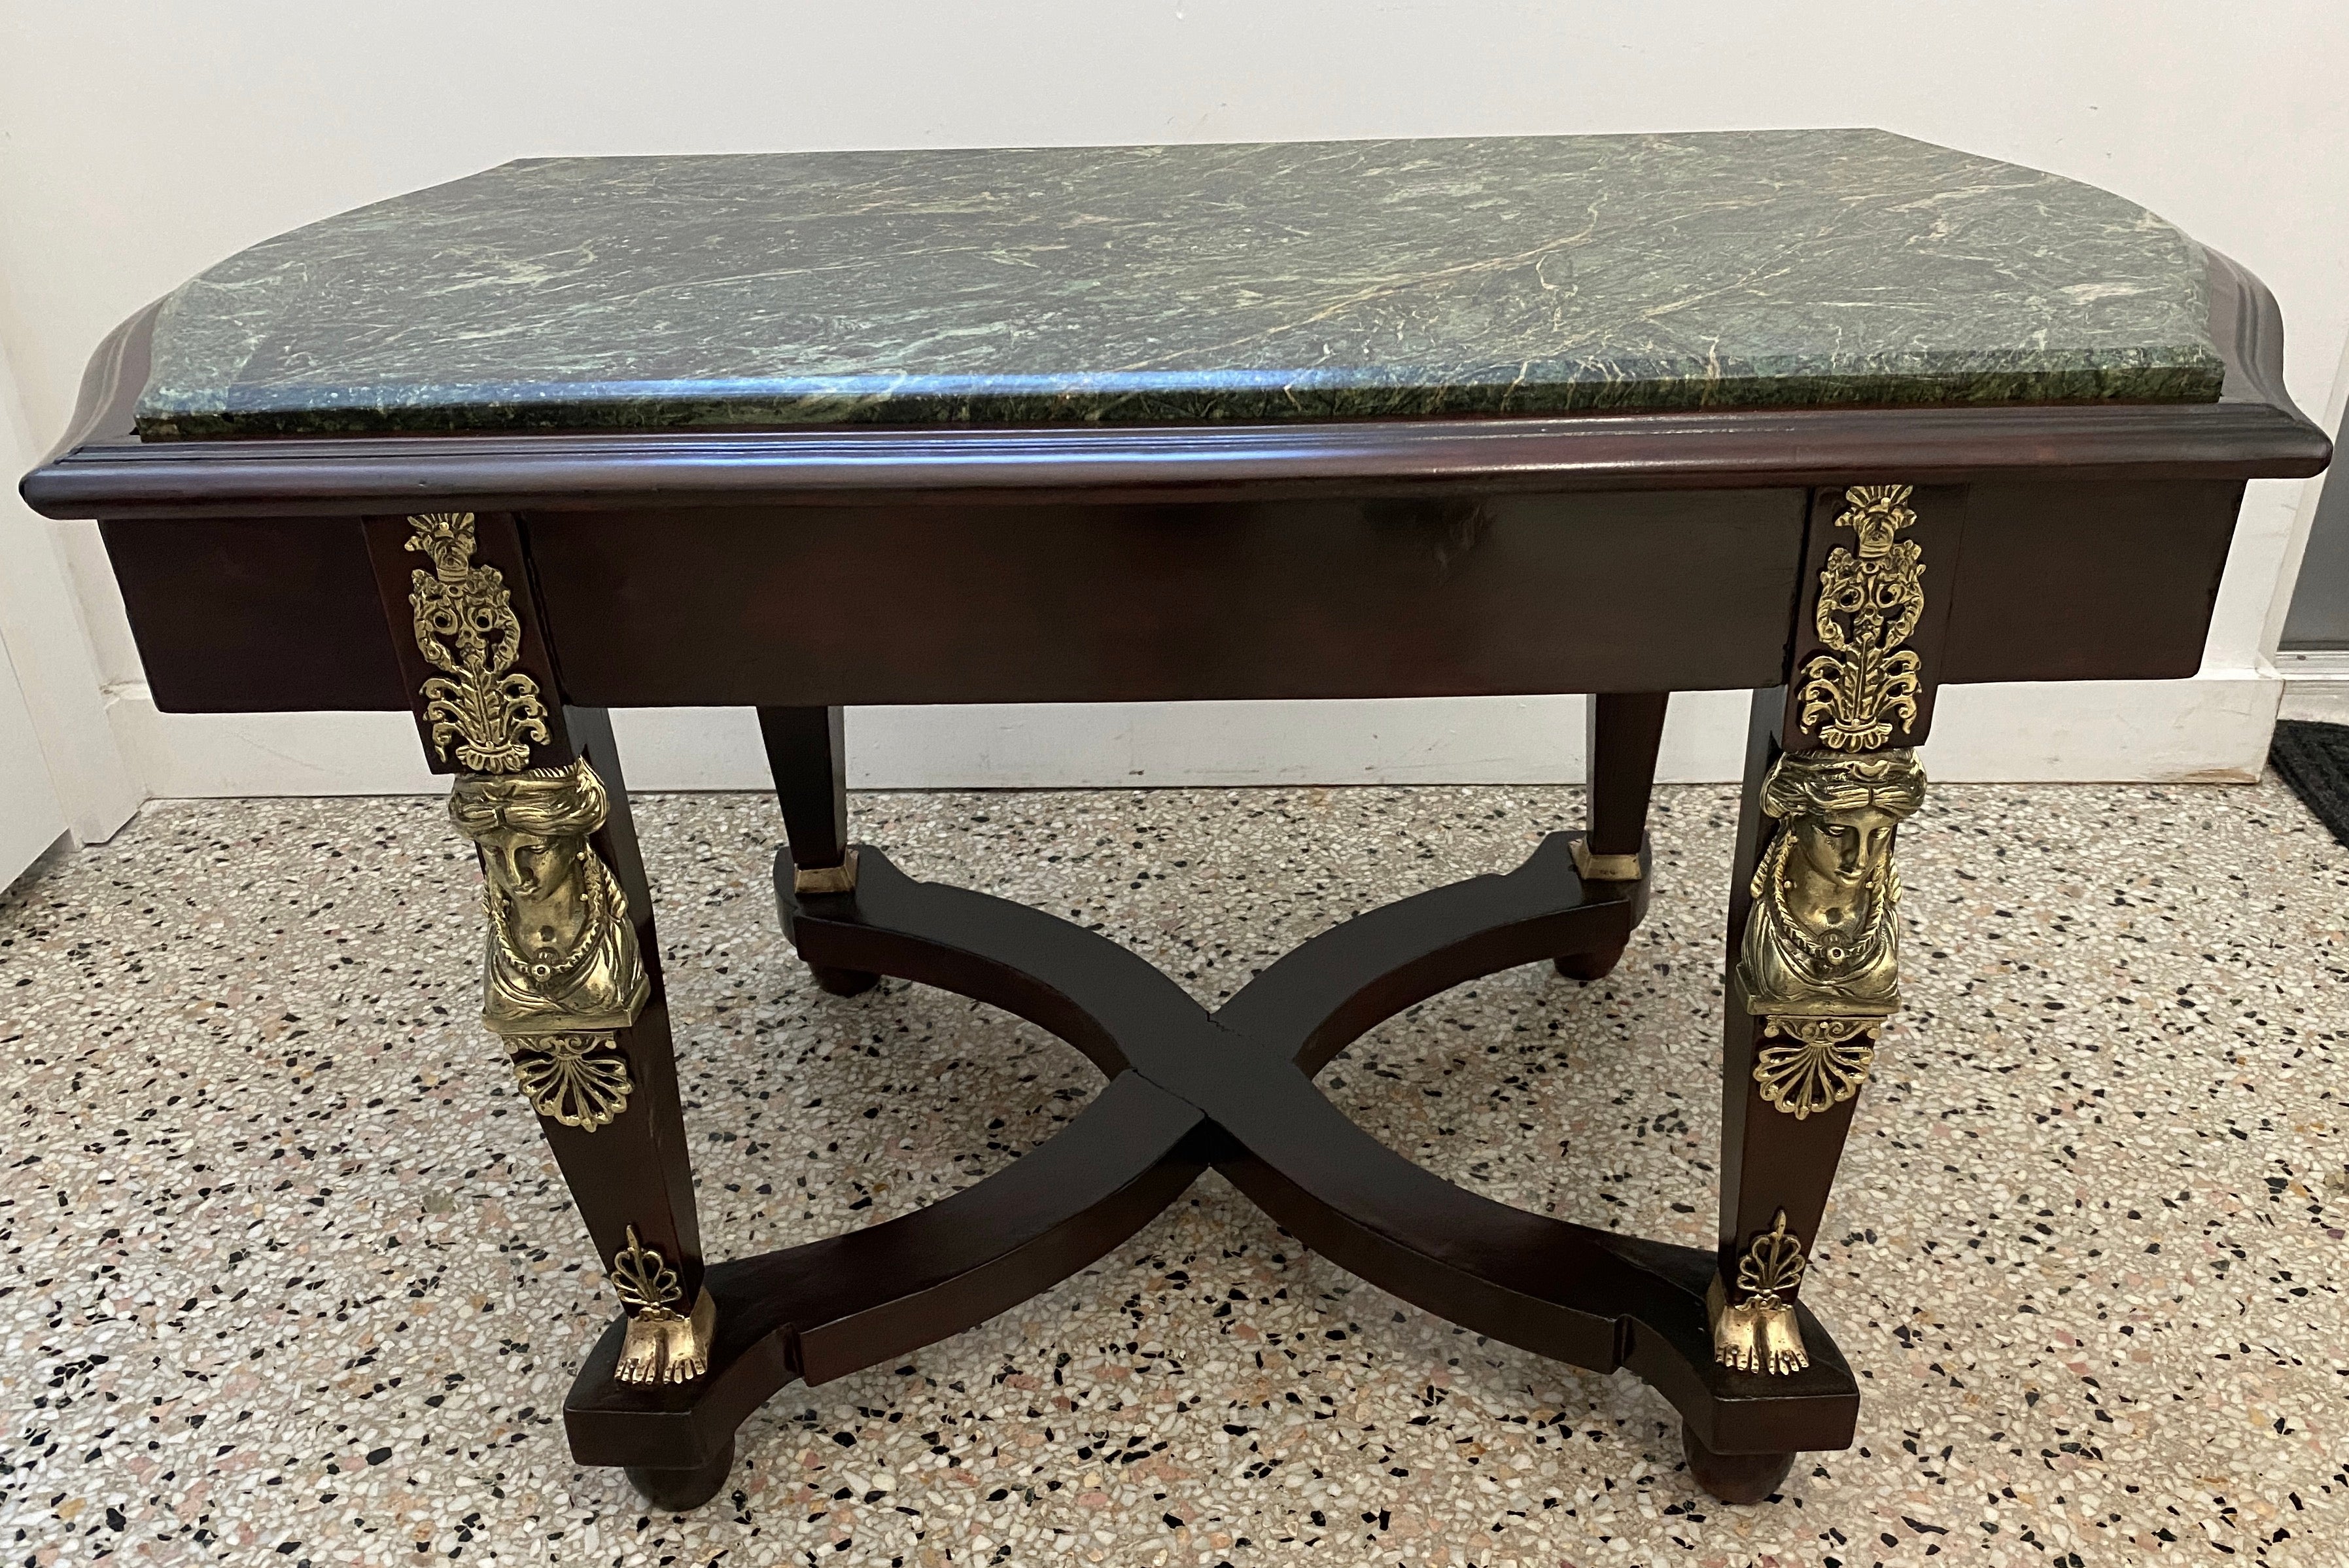 This stylish cocktail table dates to the 1920s-1930s and is in the French Empire Revival form.